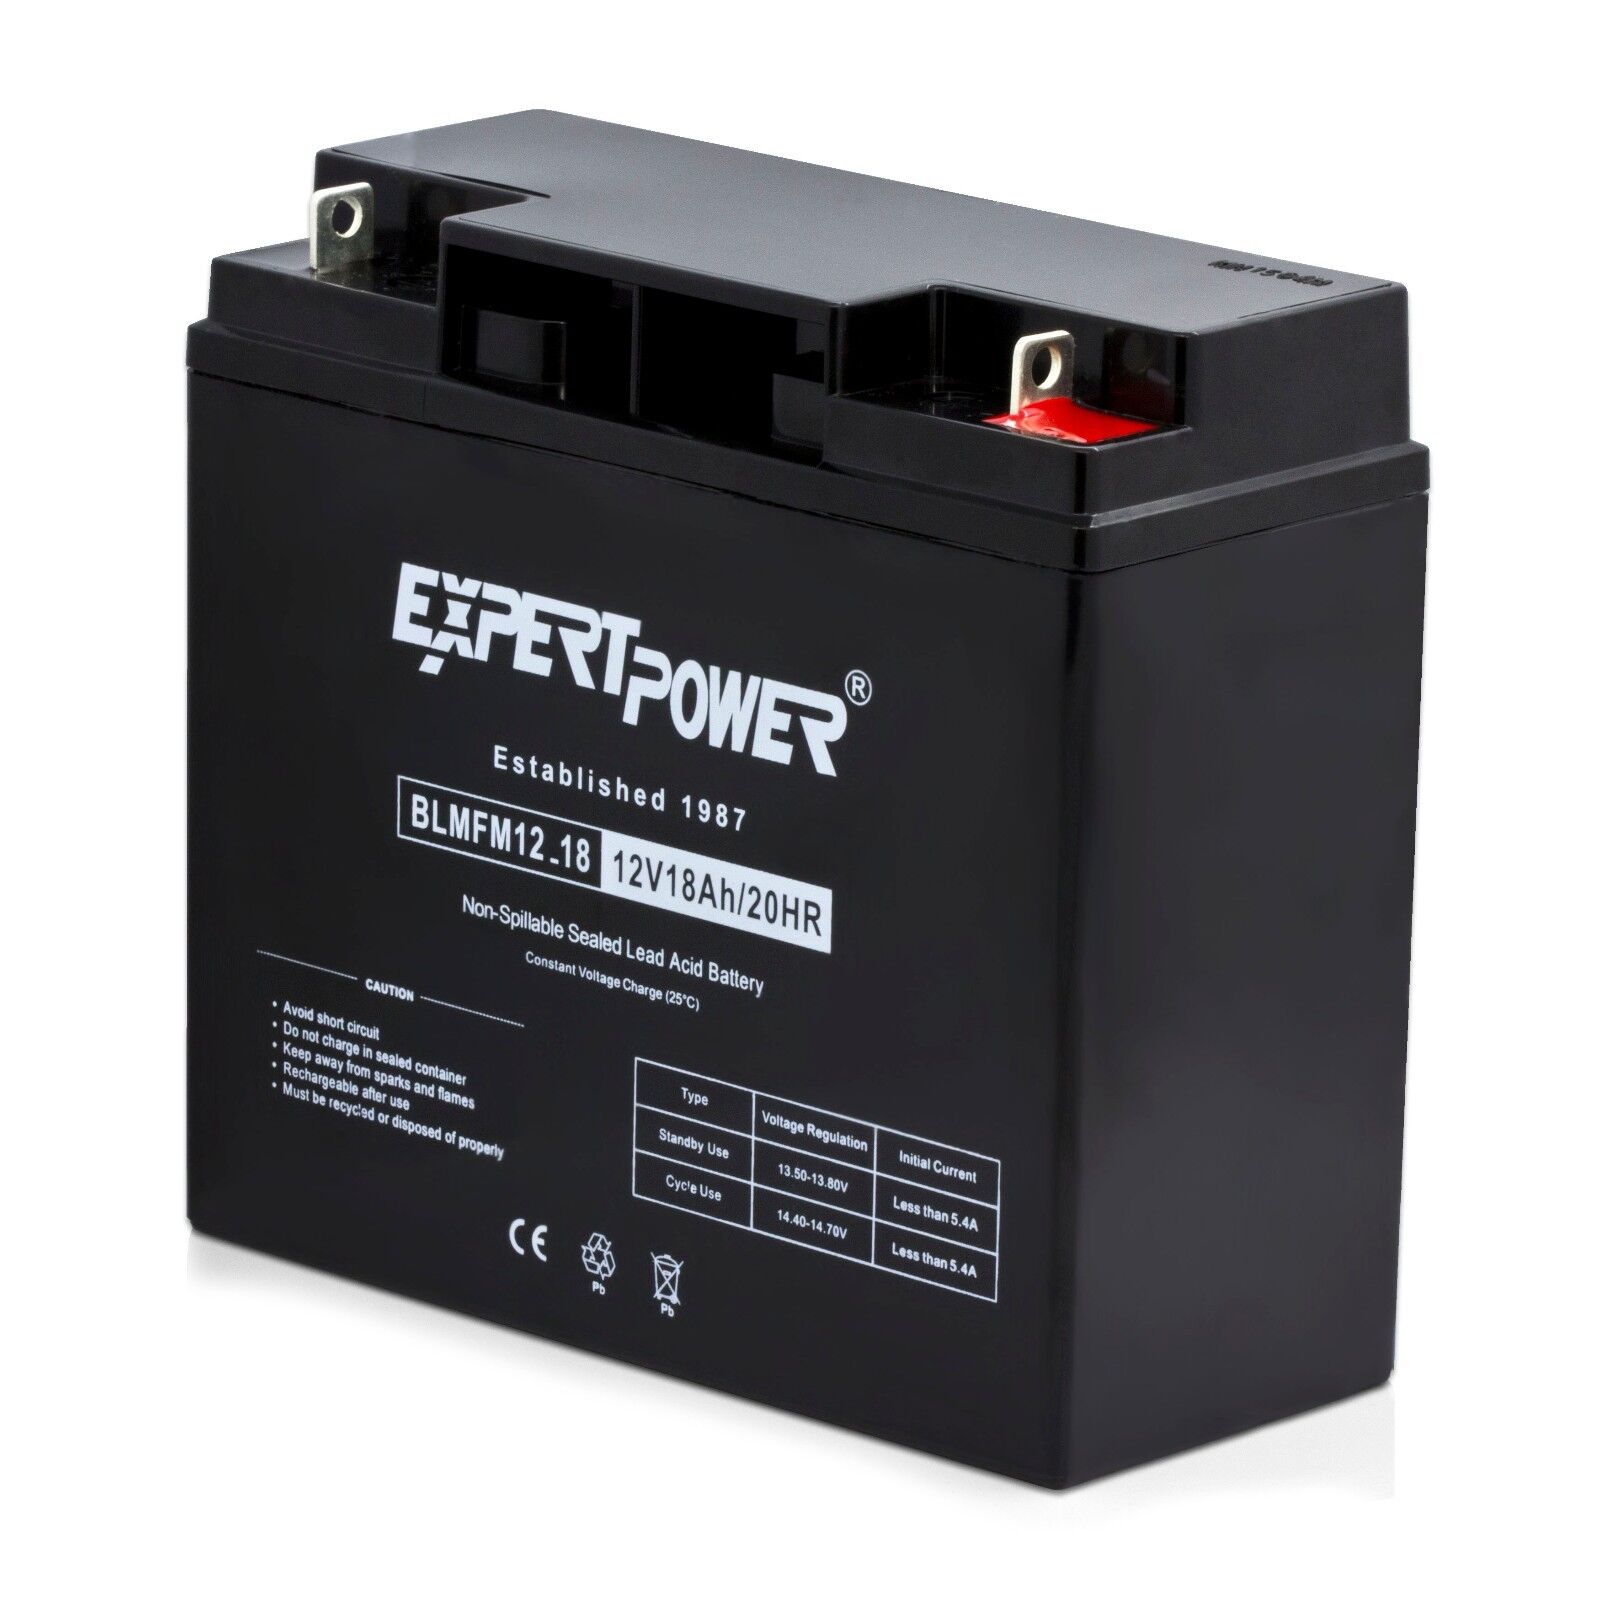 2 PACK Expert Power APC RBC7 Cartridge Battery Replacement for UPS Backup System ExpertPower EXP12180 - фотография #7